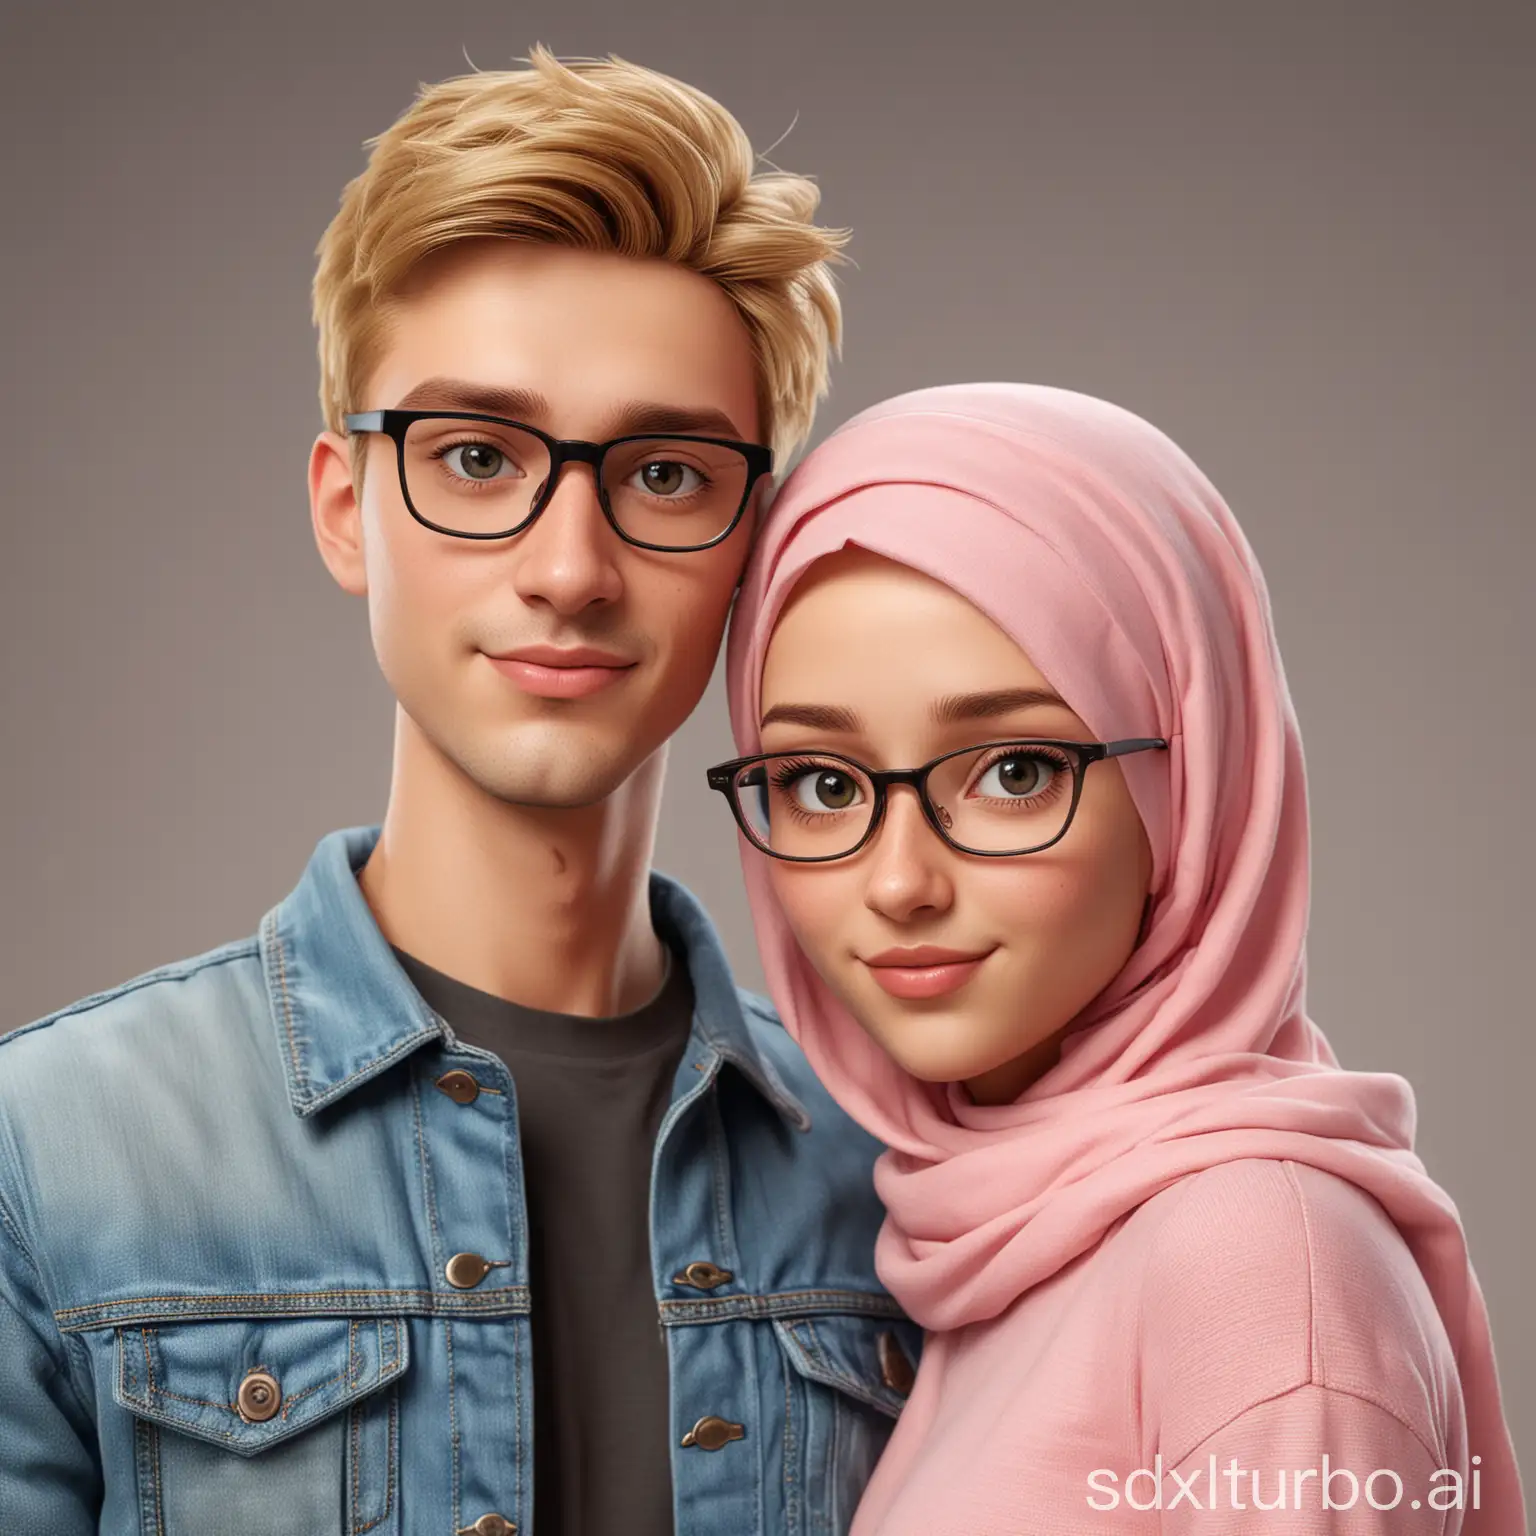 Create A Caricature 3D animation upper body with big head. A 20 year old man with normal eye shape, standing at the front wearing a denim jacket with a clearly visible collar, blonde hair, no glasses. Beside him, stood a beautiful 20 year old woman, with normal shaped eyes, wearing glasses, wearing a cream colored sweater and a pink hijab. They stand close to each other, looking focused at the camera in selfie style. The background color matches their clothes.